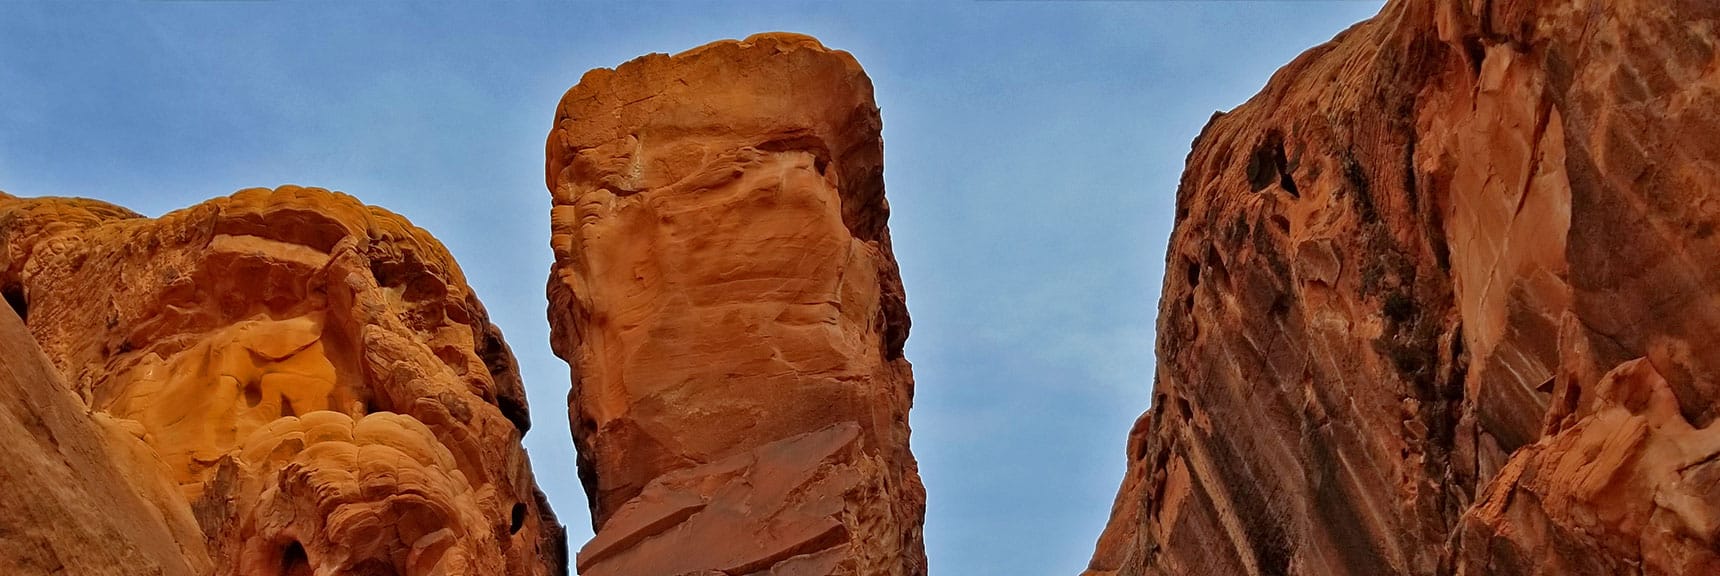 This Huge Pinnacle Was Balanced Impossibly in Fire Canyon in Valley of Fire State Park, Nevada